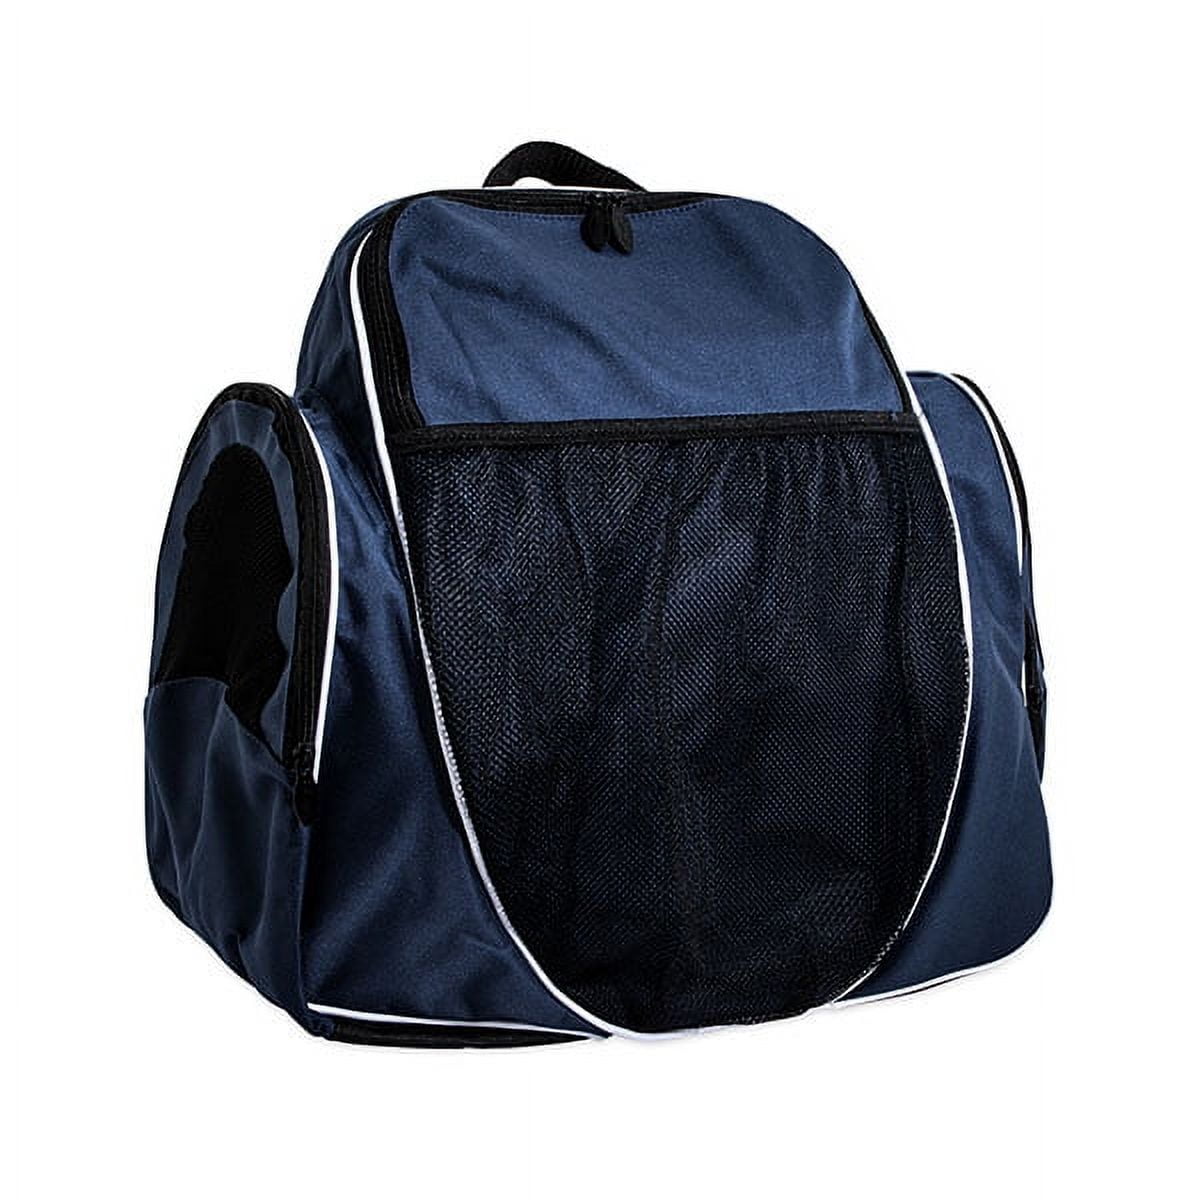 Bp1810ny 18 X 19 X 10 In. Deluxe All Purpose Backpack, Navy